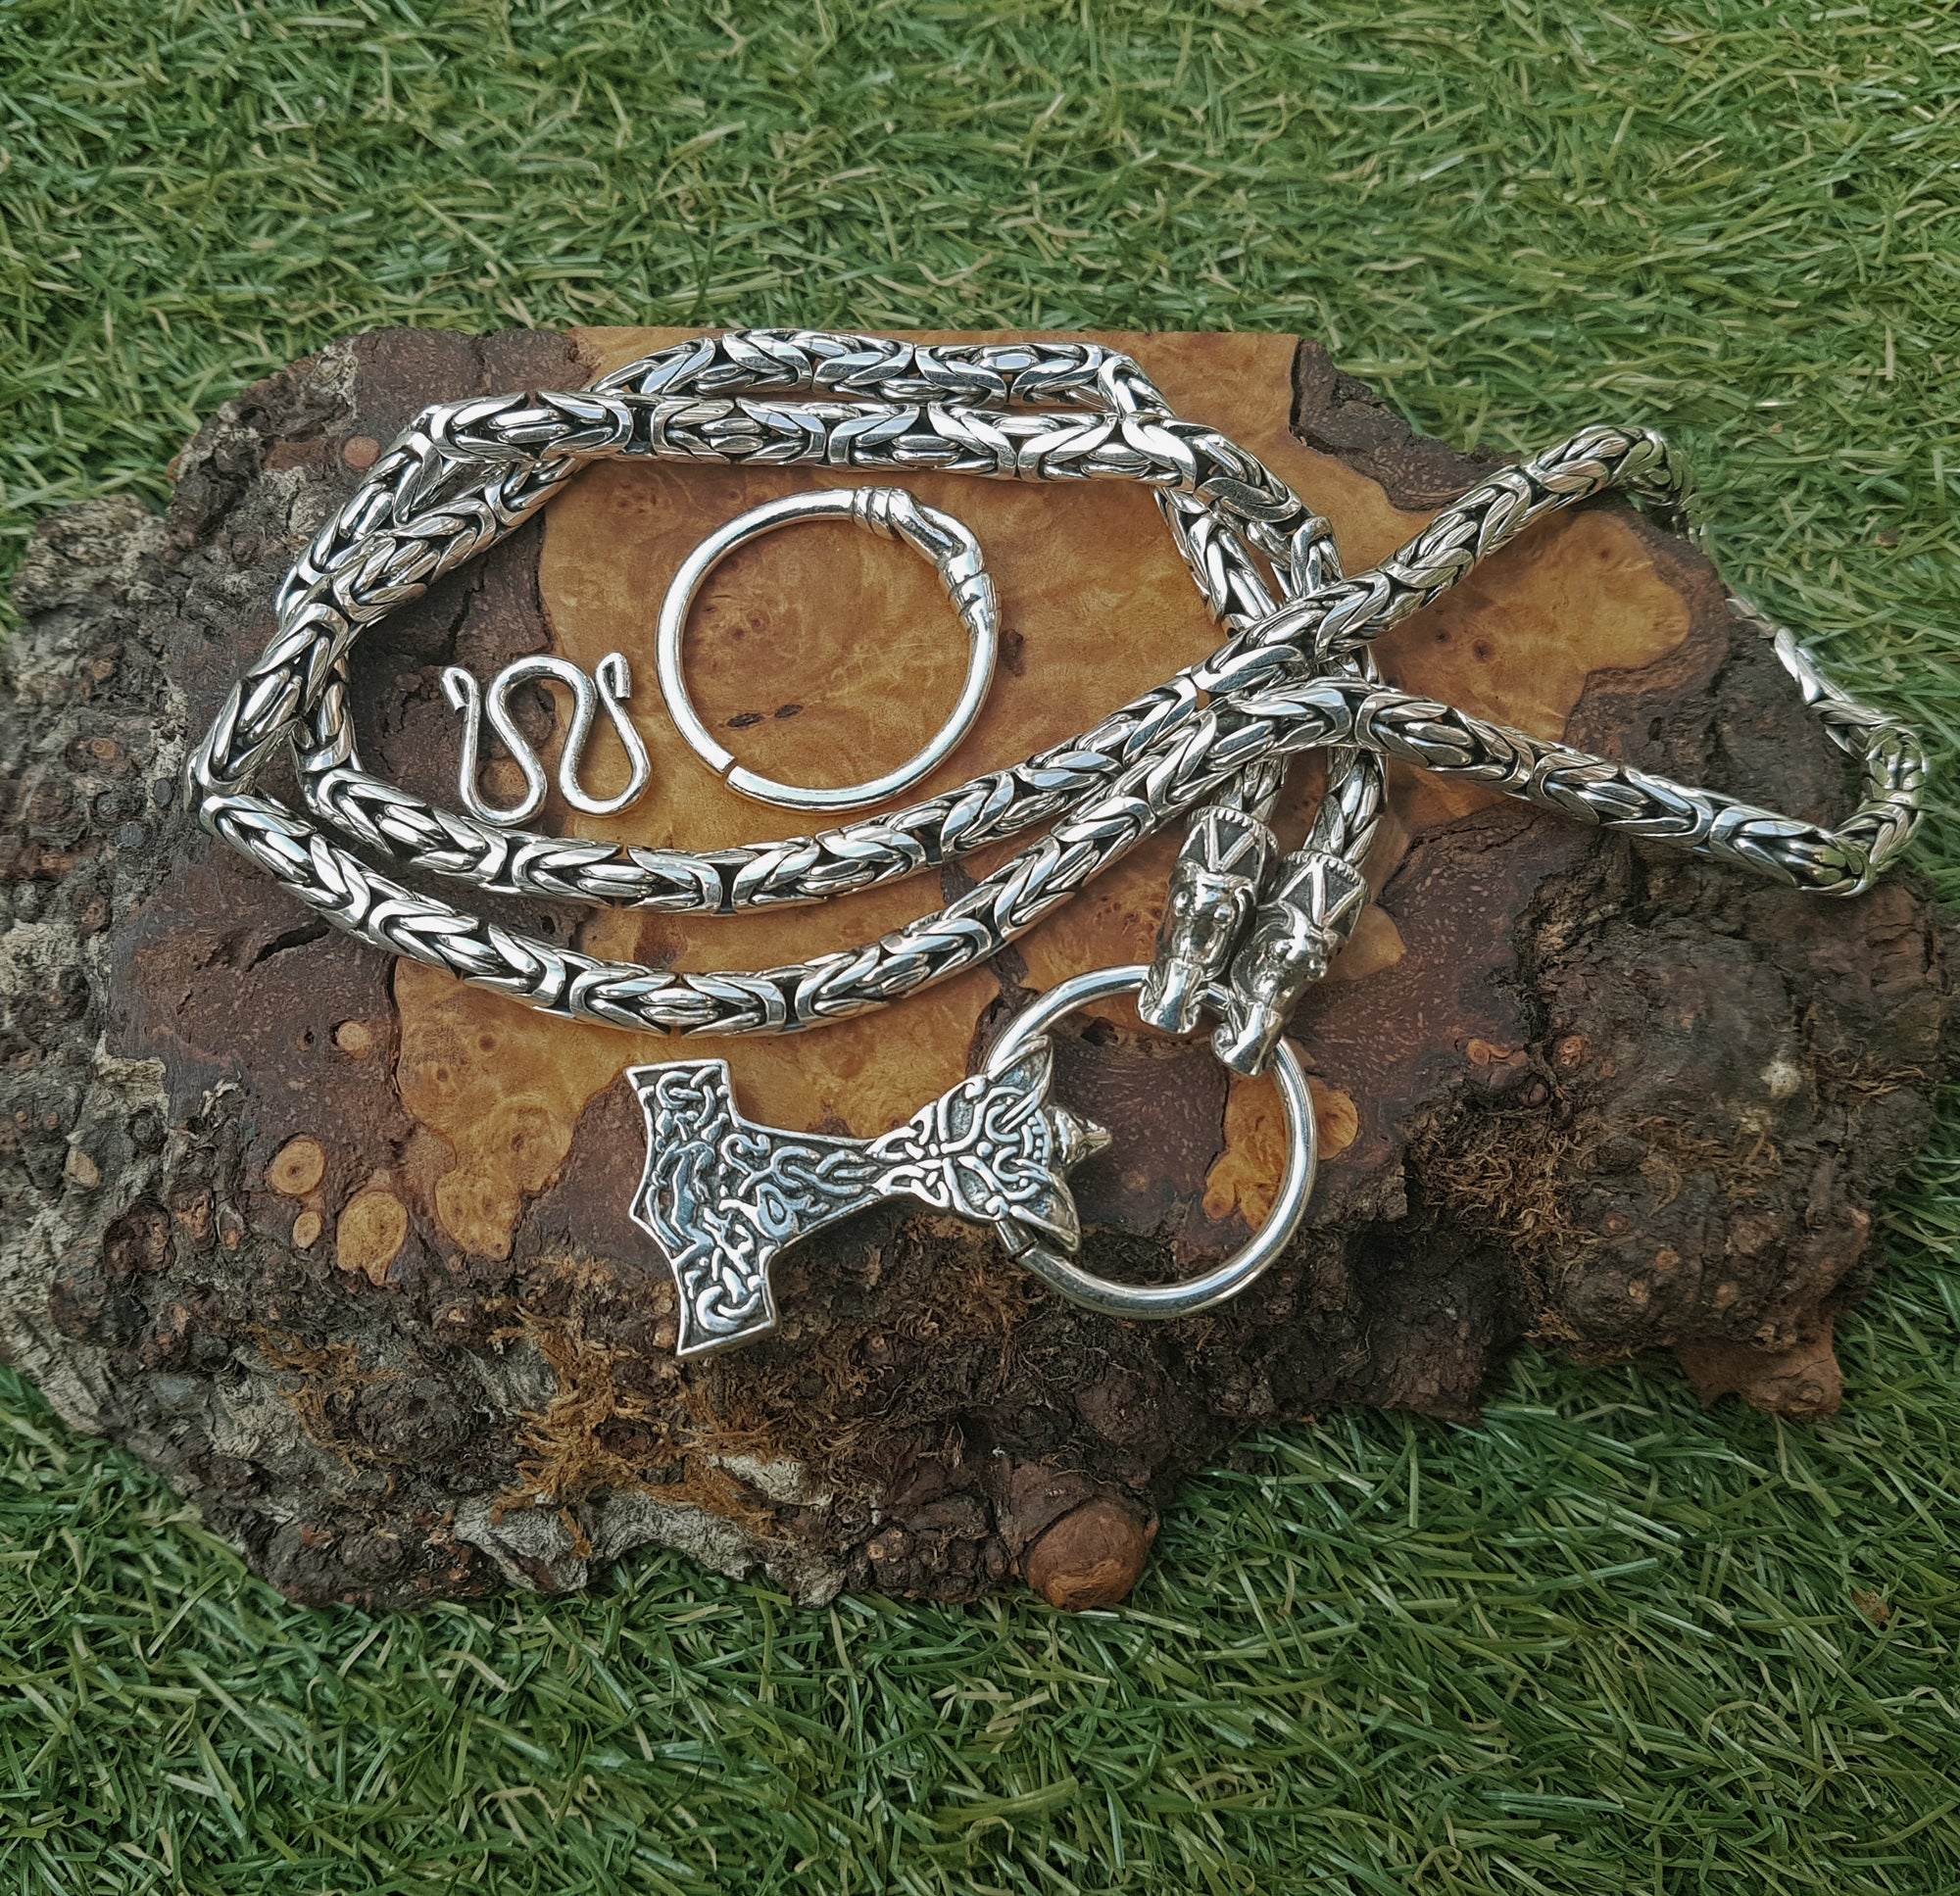 5mm Thick Silver King Chain Thors Hammer Necklace - Gotland Dragon Heads - Wolf Hammer - Choice of Clasps